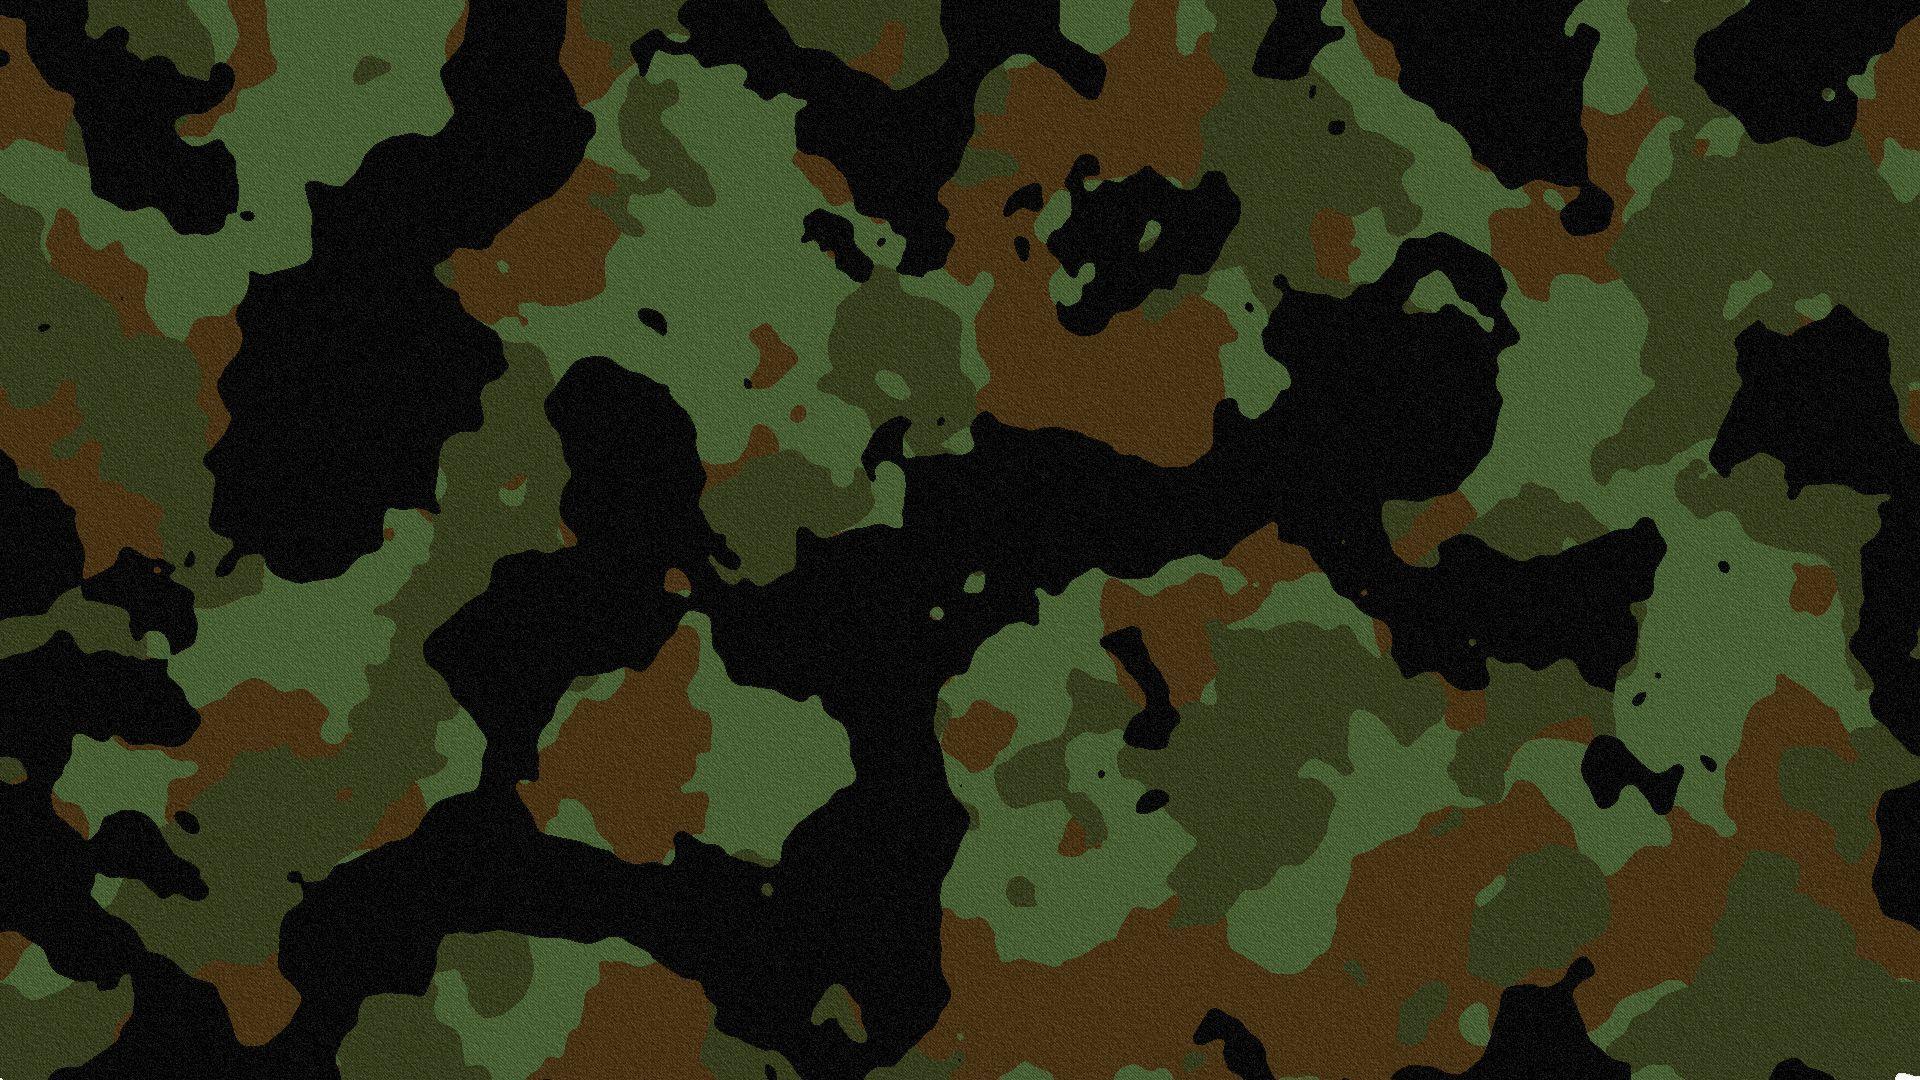 Wallpaper.wiki Camouflage Pattern Abstract Hd Wallpaper 1920x1080